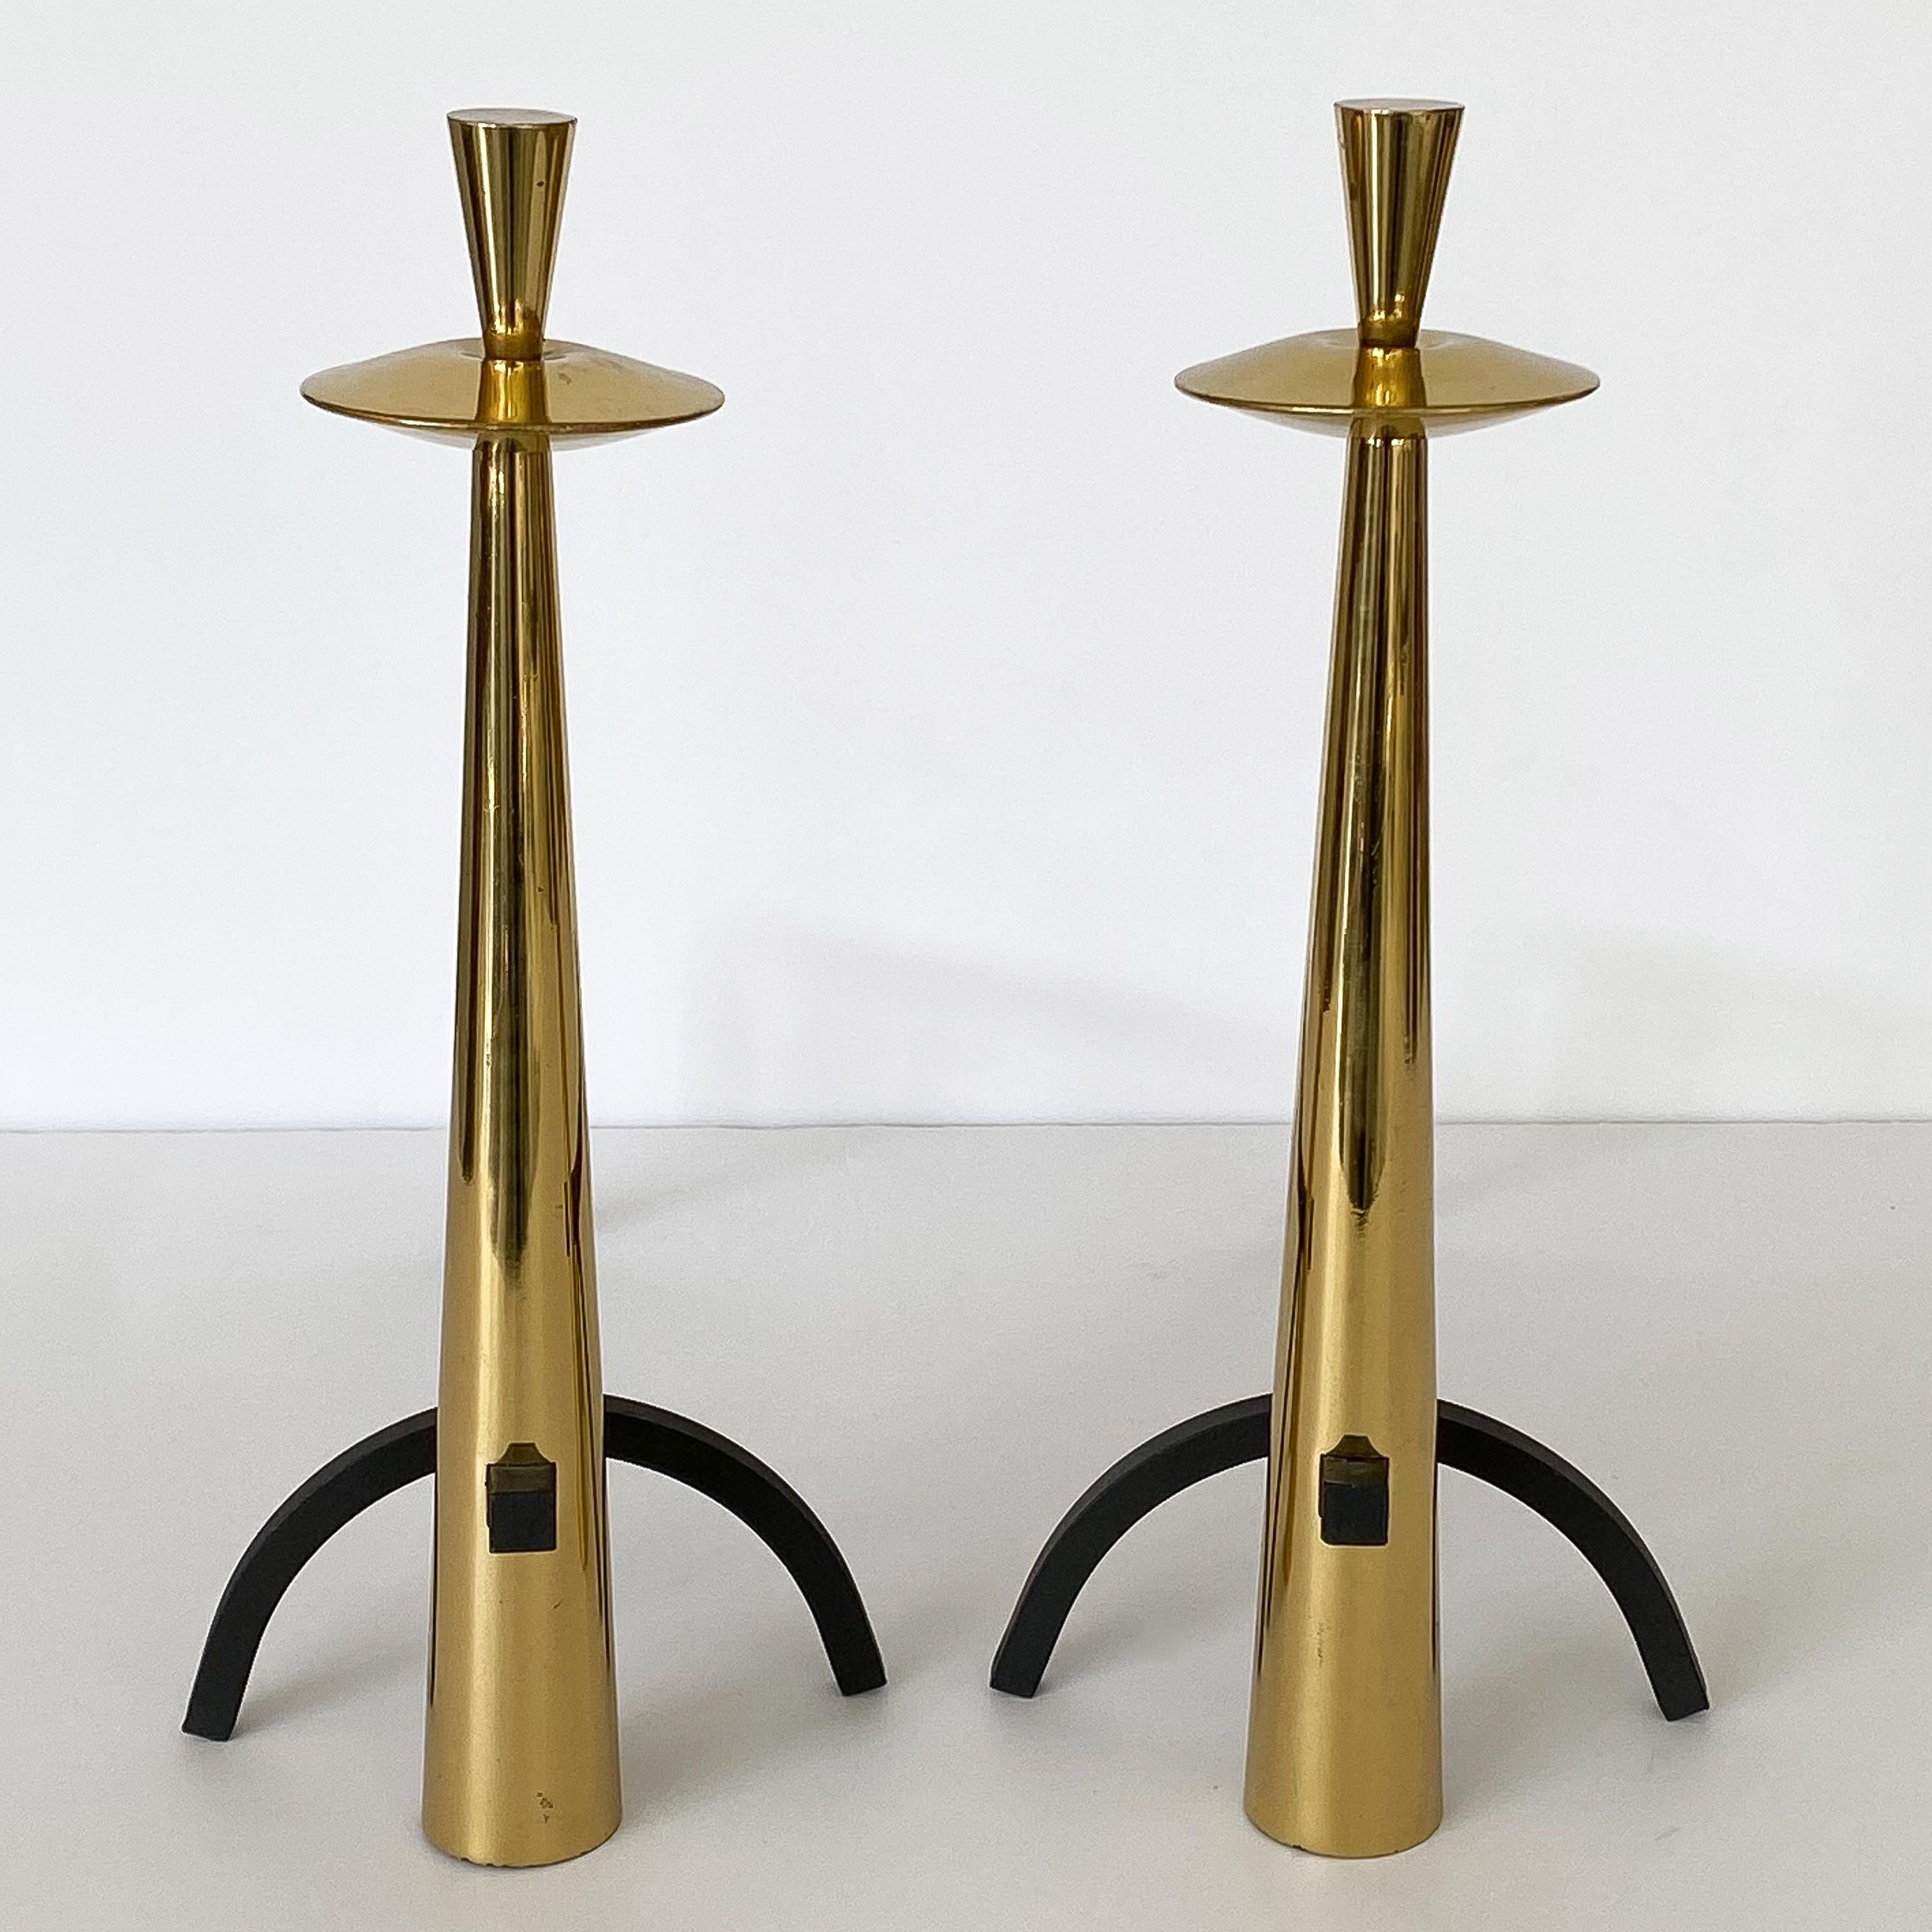 Set / pair modernist brass fireplace andirons, circa 1960s. Striking pair of modern brass andirons with blackened wrought iron. These andirons feature an elongated conical form with stylized saucer shape detail and conical finials. Blackened iron